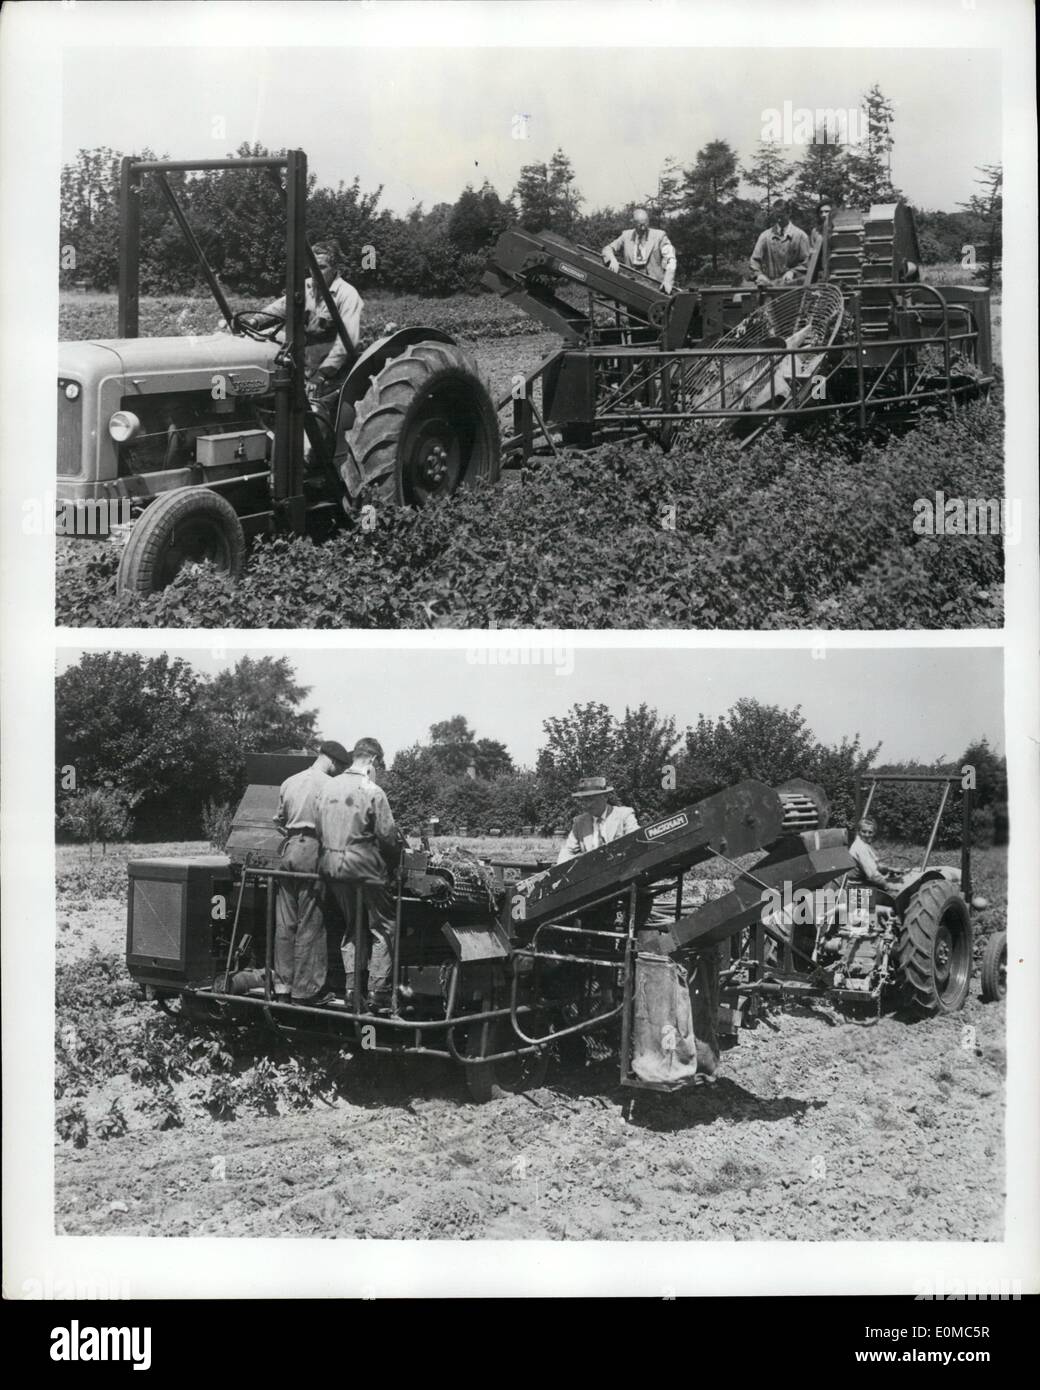 Aug. 08, 1954 - Something New in Potato Harvesters. A newtype of potato harvester which has taken 14 years to develop is to be mass produced in Britain. Invented by Mr. P.J. Packman, the harvester works on a completely new principle of soil separation and potato collection, sntirely avoiding the use of chain belt and sprockets. Handling of the crop is gentle emloying rubber ''fingers'', and the machine has a rubber separation carpet. Five tons of soil are handled every minute. The harvester would allow a farmer to lift his crop with his own permanent staff instead of hiring extra pickers Stock Photo